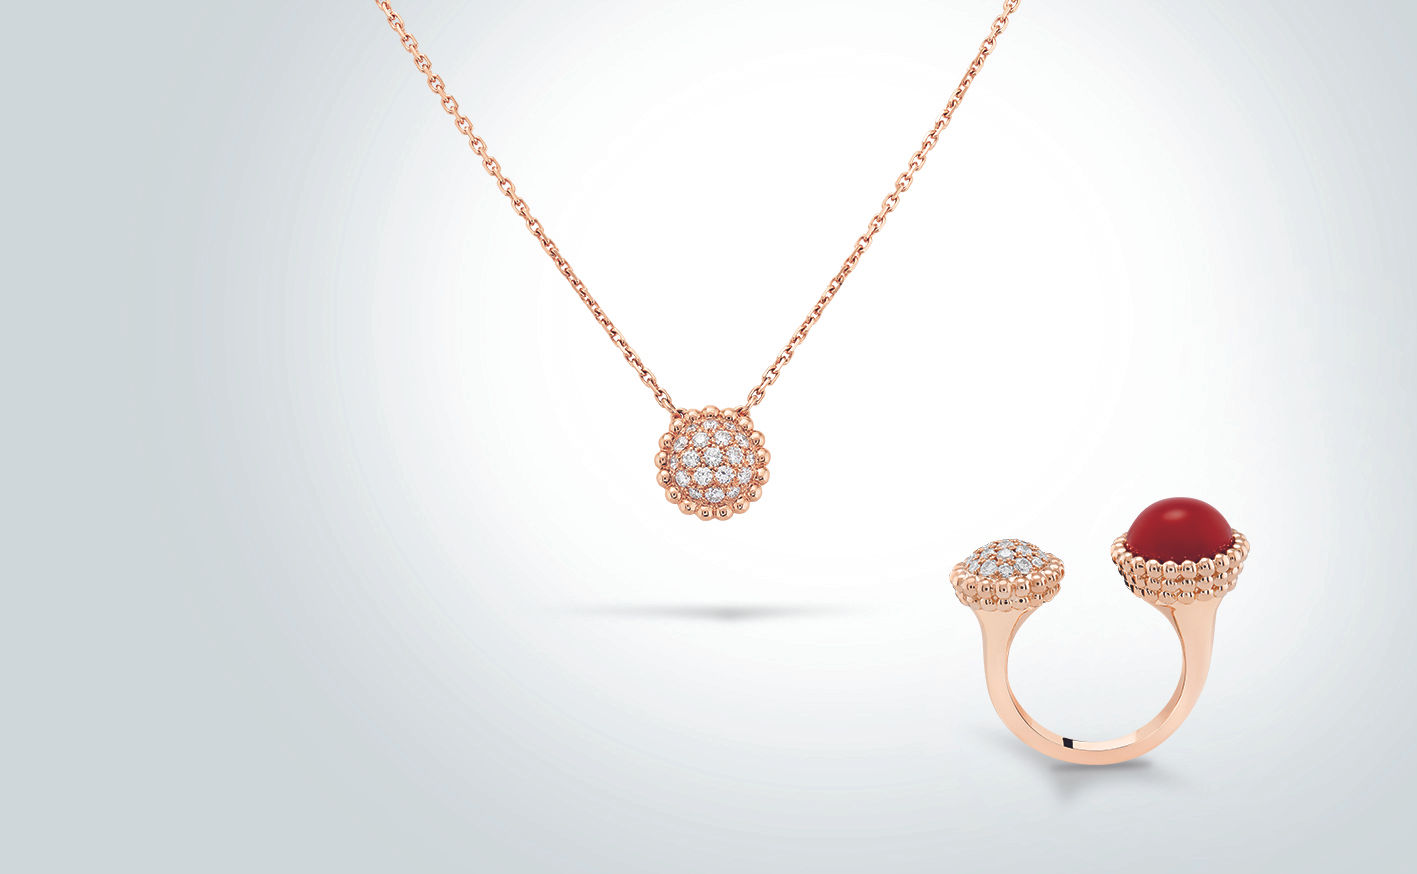 Van Cleef & Arpels Perlée collection is perfect for giving